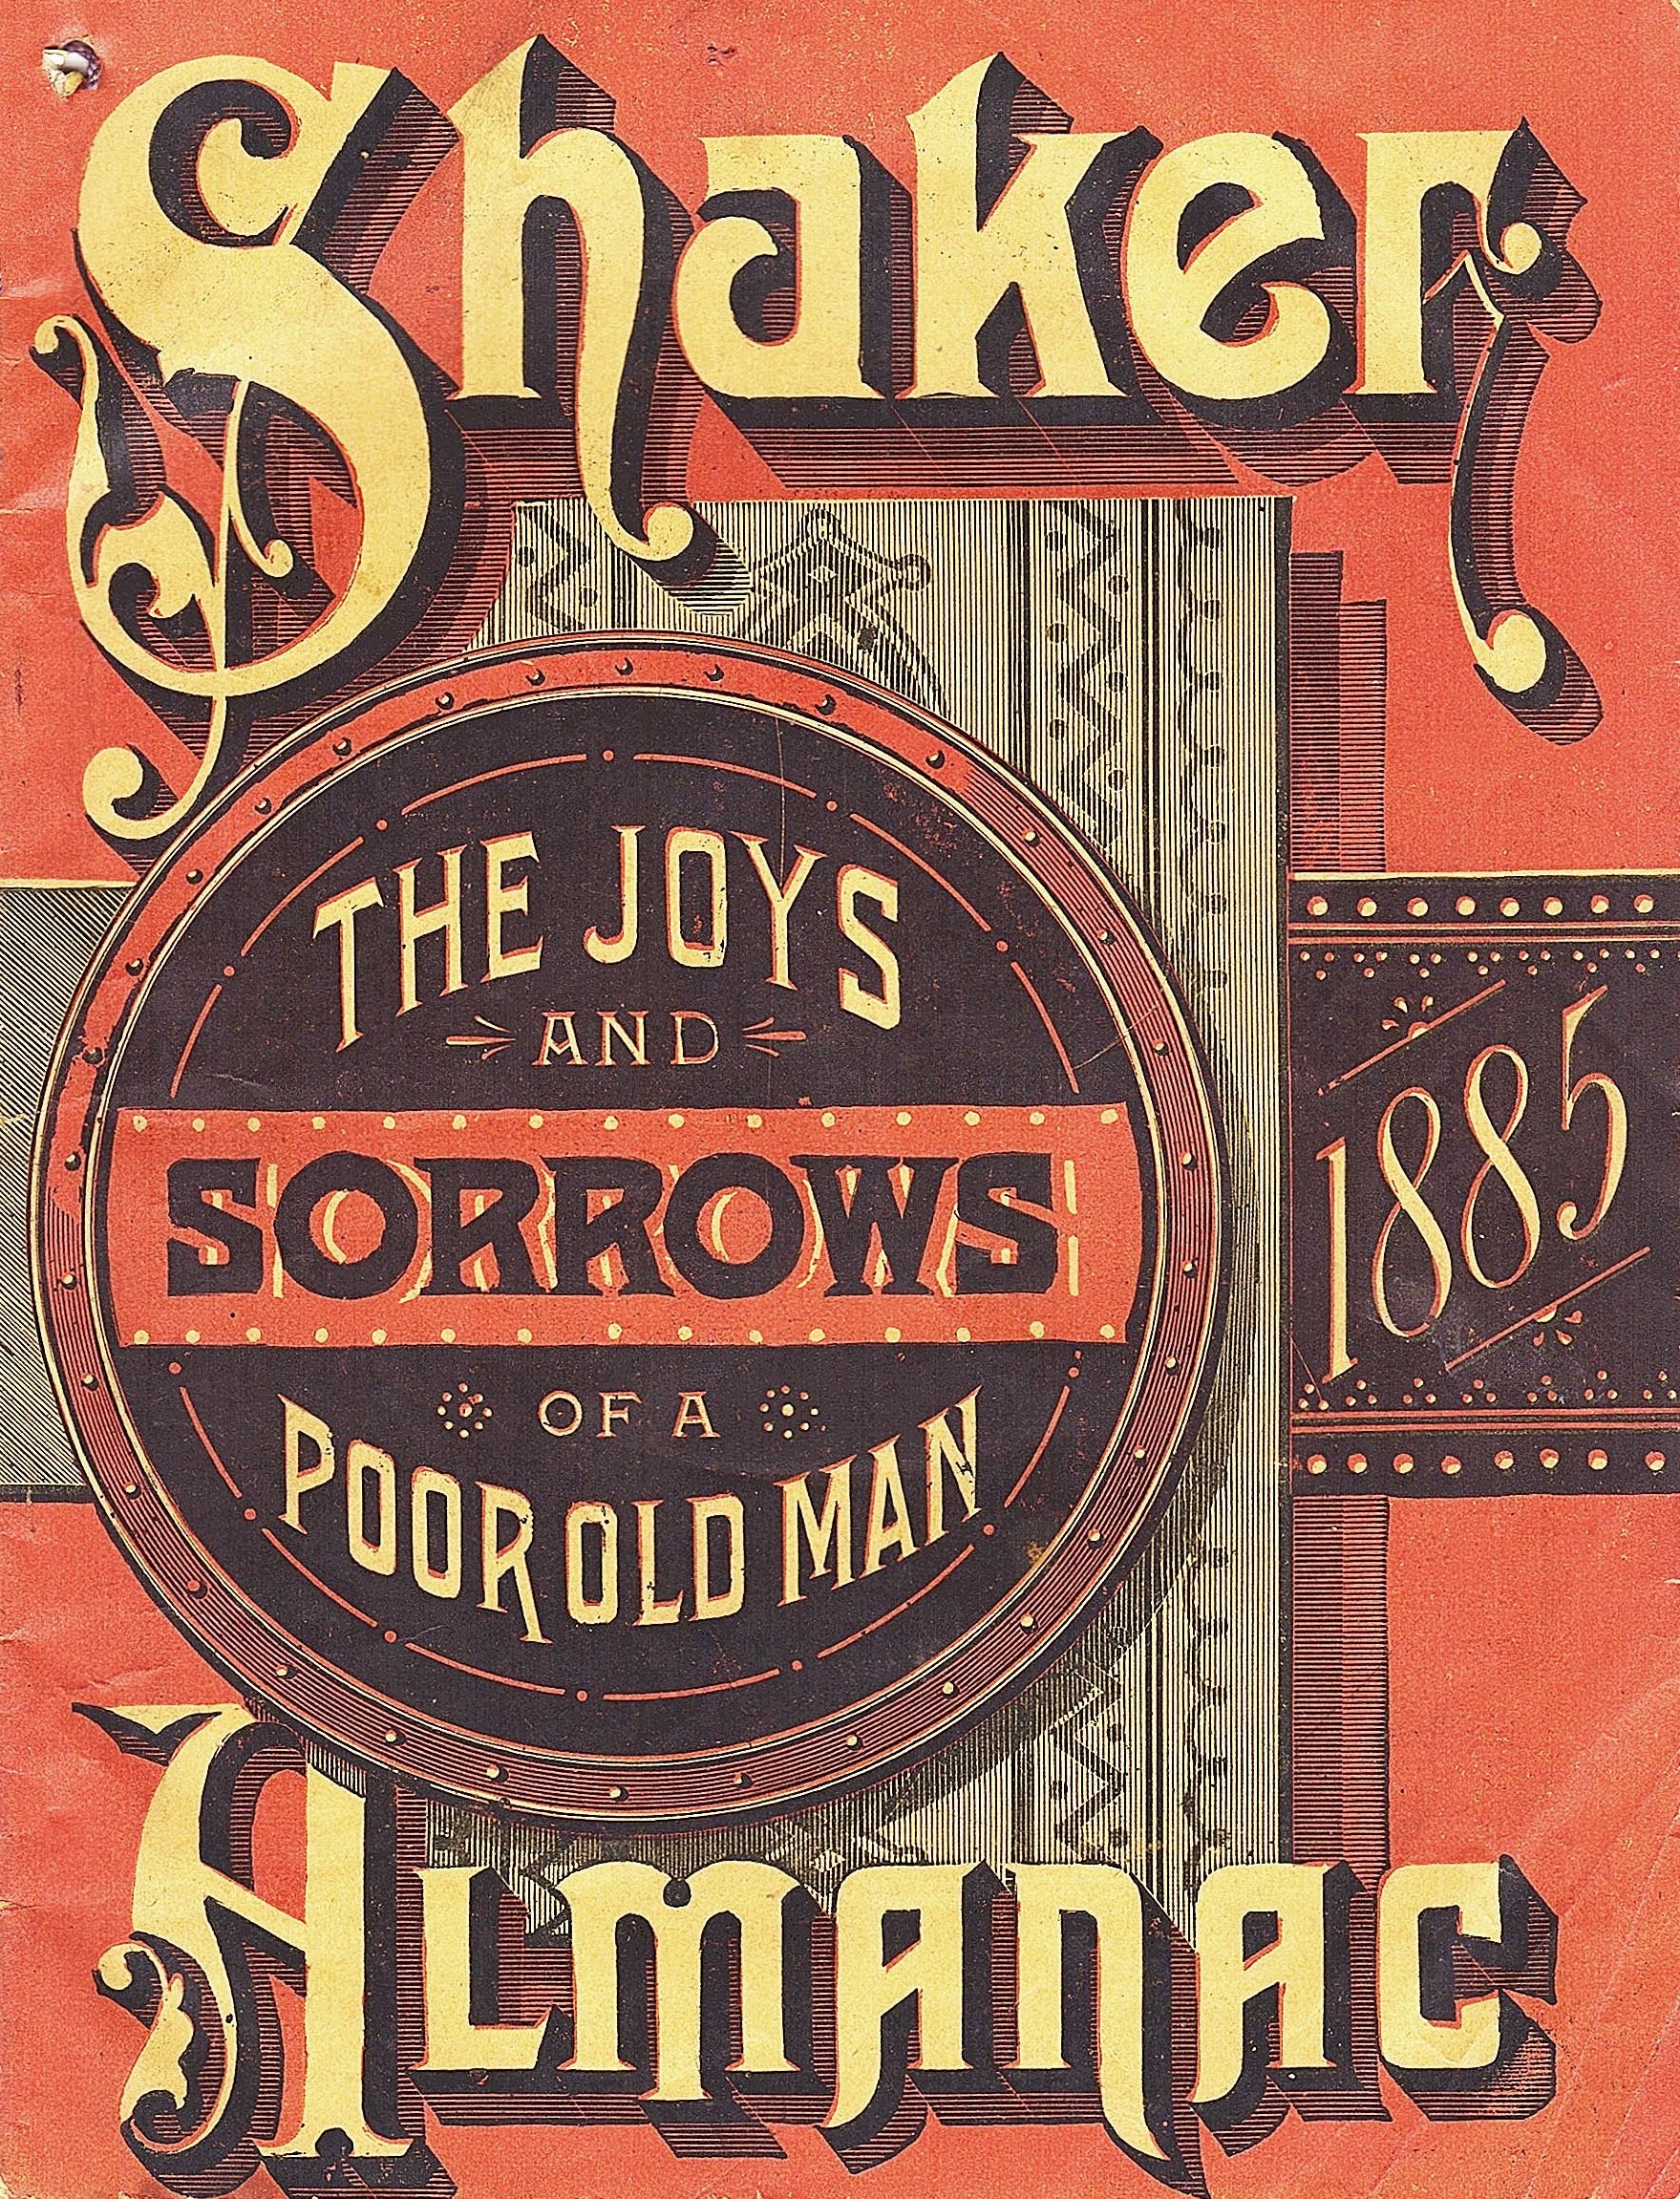 Shaker and the joys and sorrows of an old man almanac.